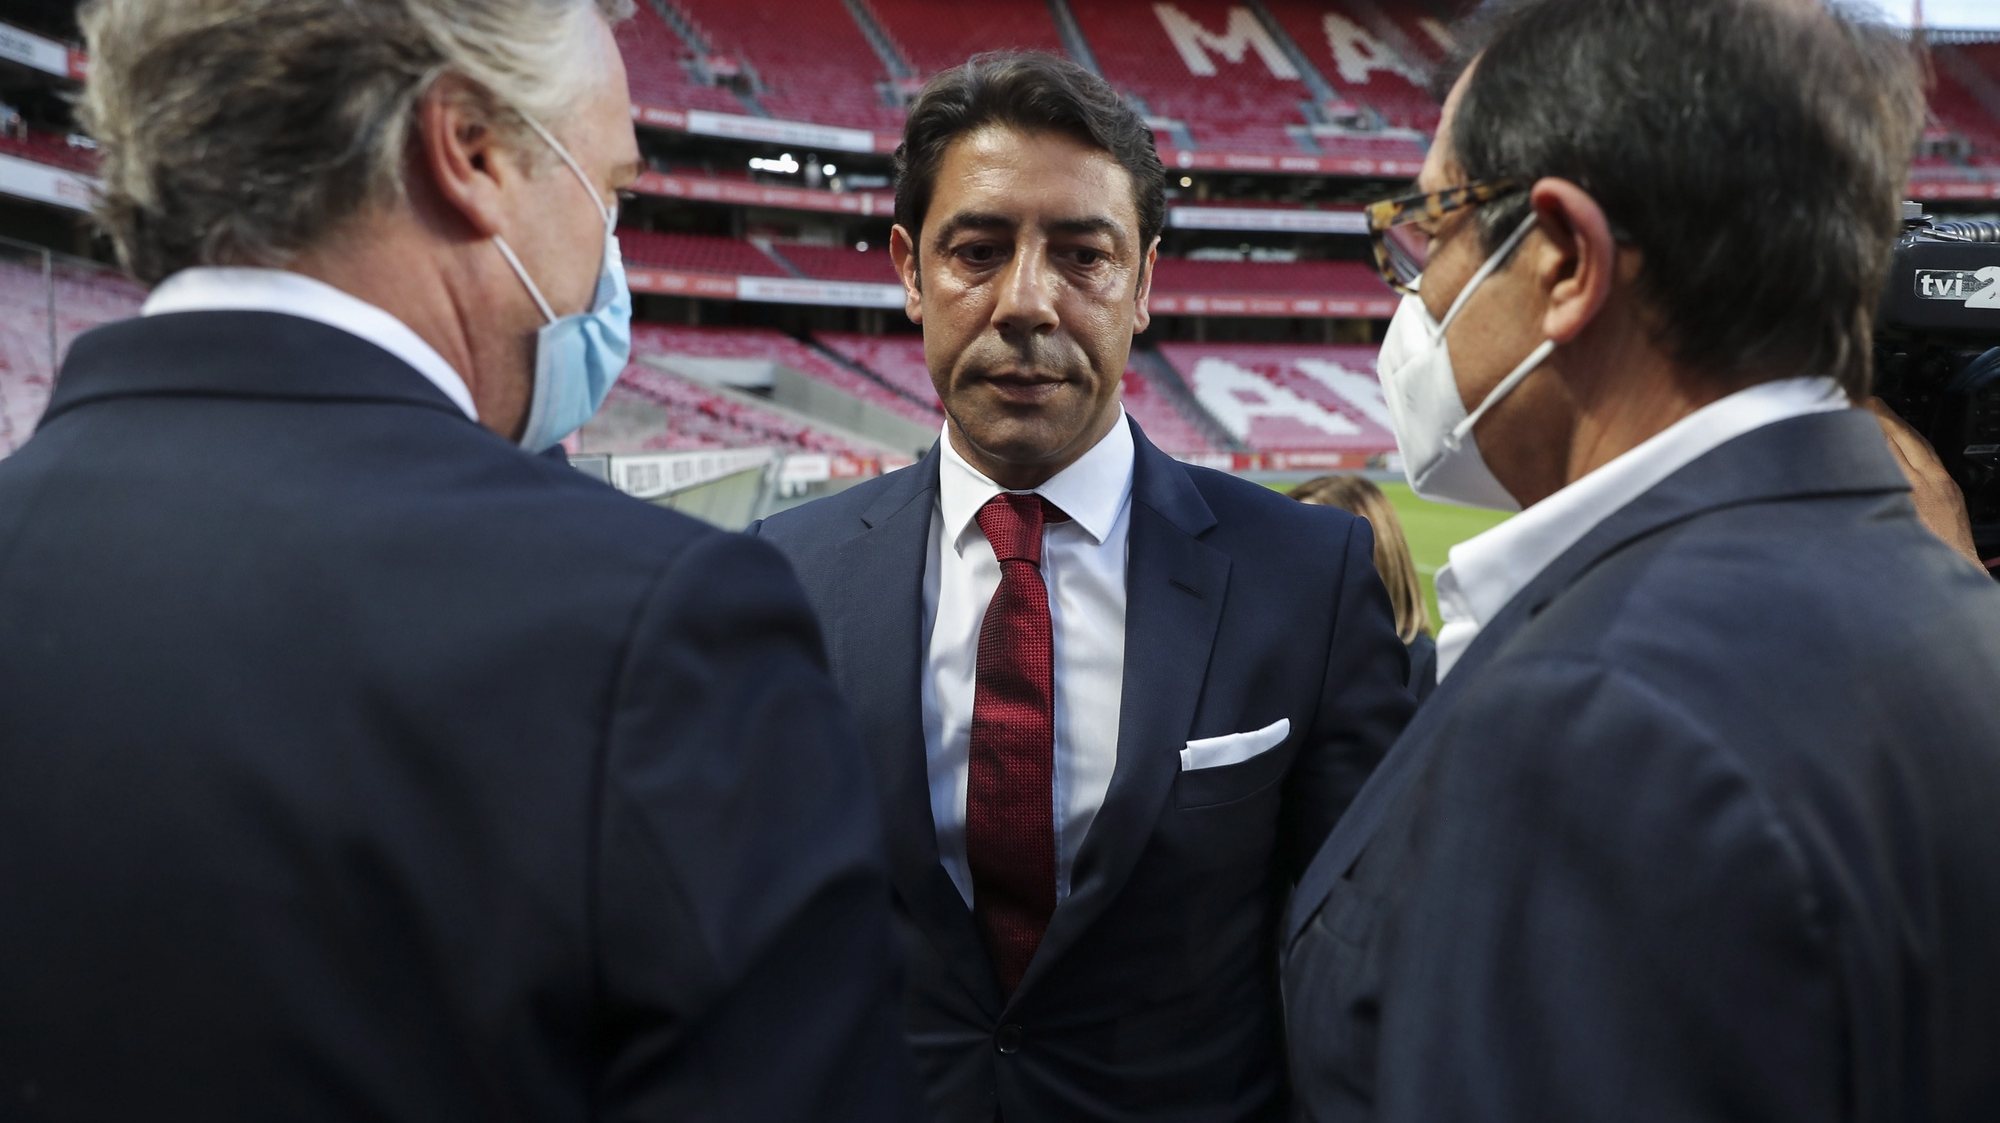 epa09334697 Former Portuguese player Rui Costa (C) is greeted by club officials after being appointed new president of Portuguese soccer club Benfica in Lisbon, Portugal. 09 July 2021. Rui Costa replaced Luis Filipe Vieira, who suspended his duties after he was detained as part of an investigation into alleged tax fraud and money laundering.  EPA/MIGUEL A. LOPES